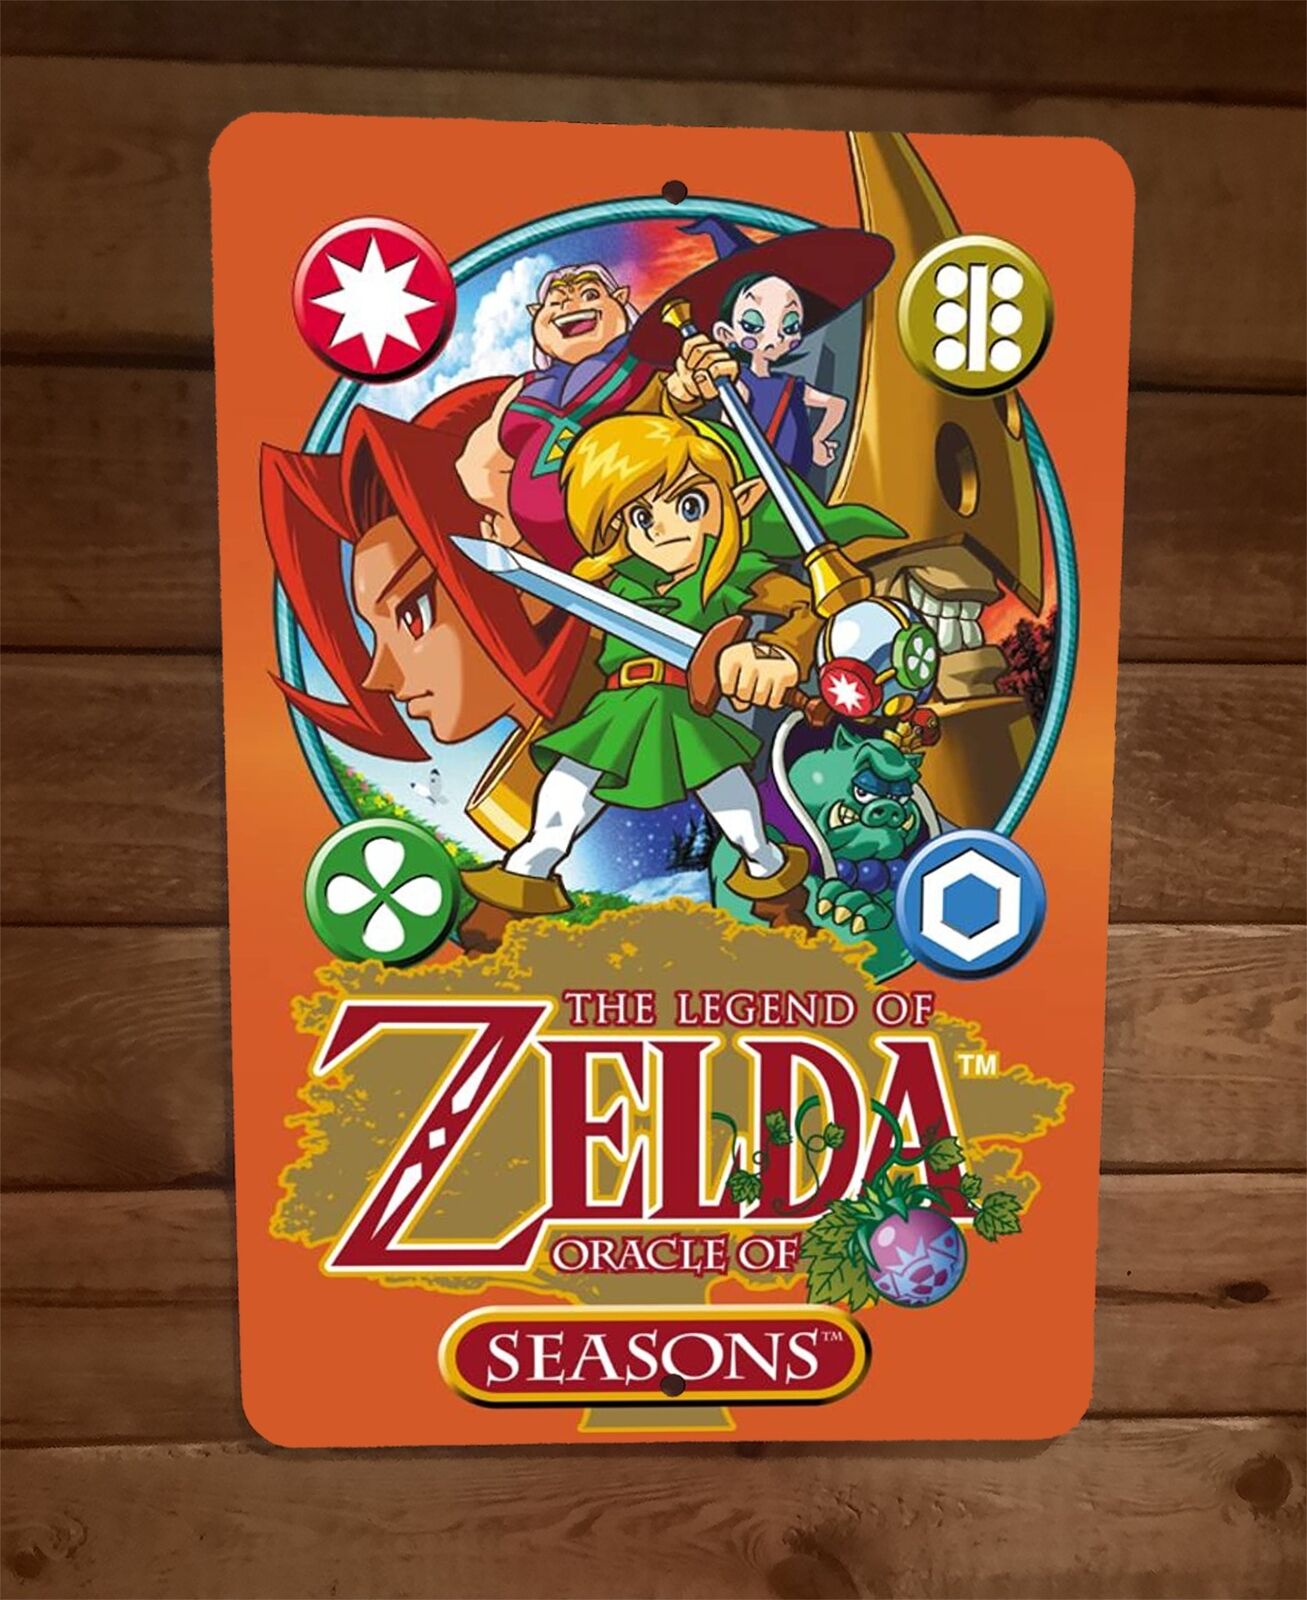 The Legend of Oracle of Zelda Seasons 8x12 Metal Wall Sign Video Game Poster